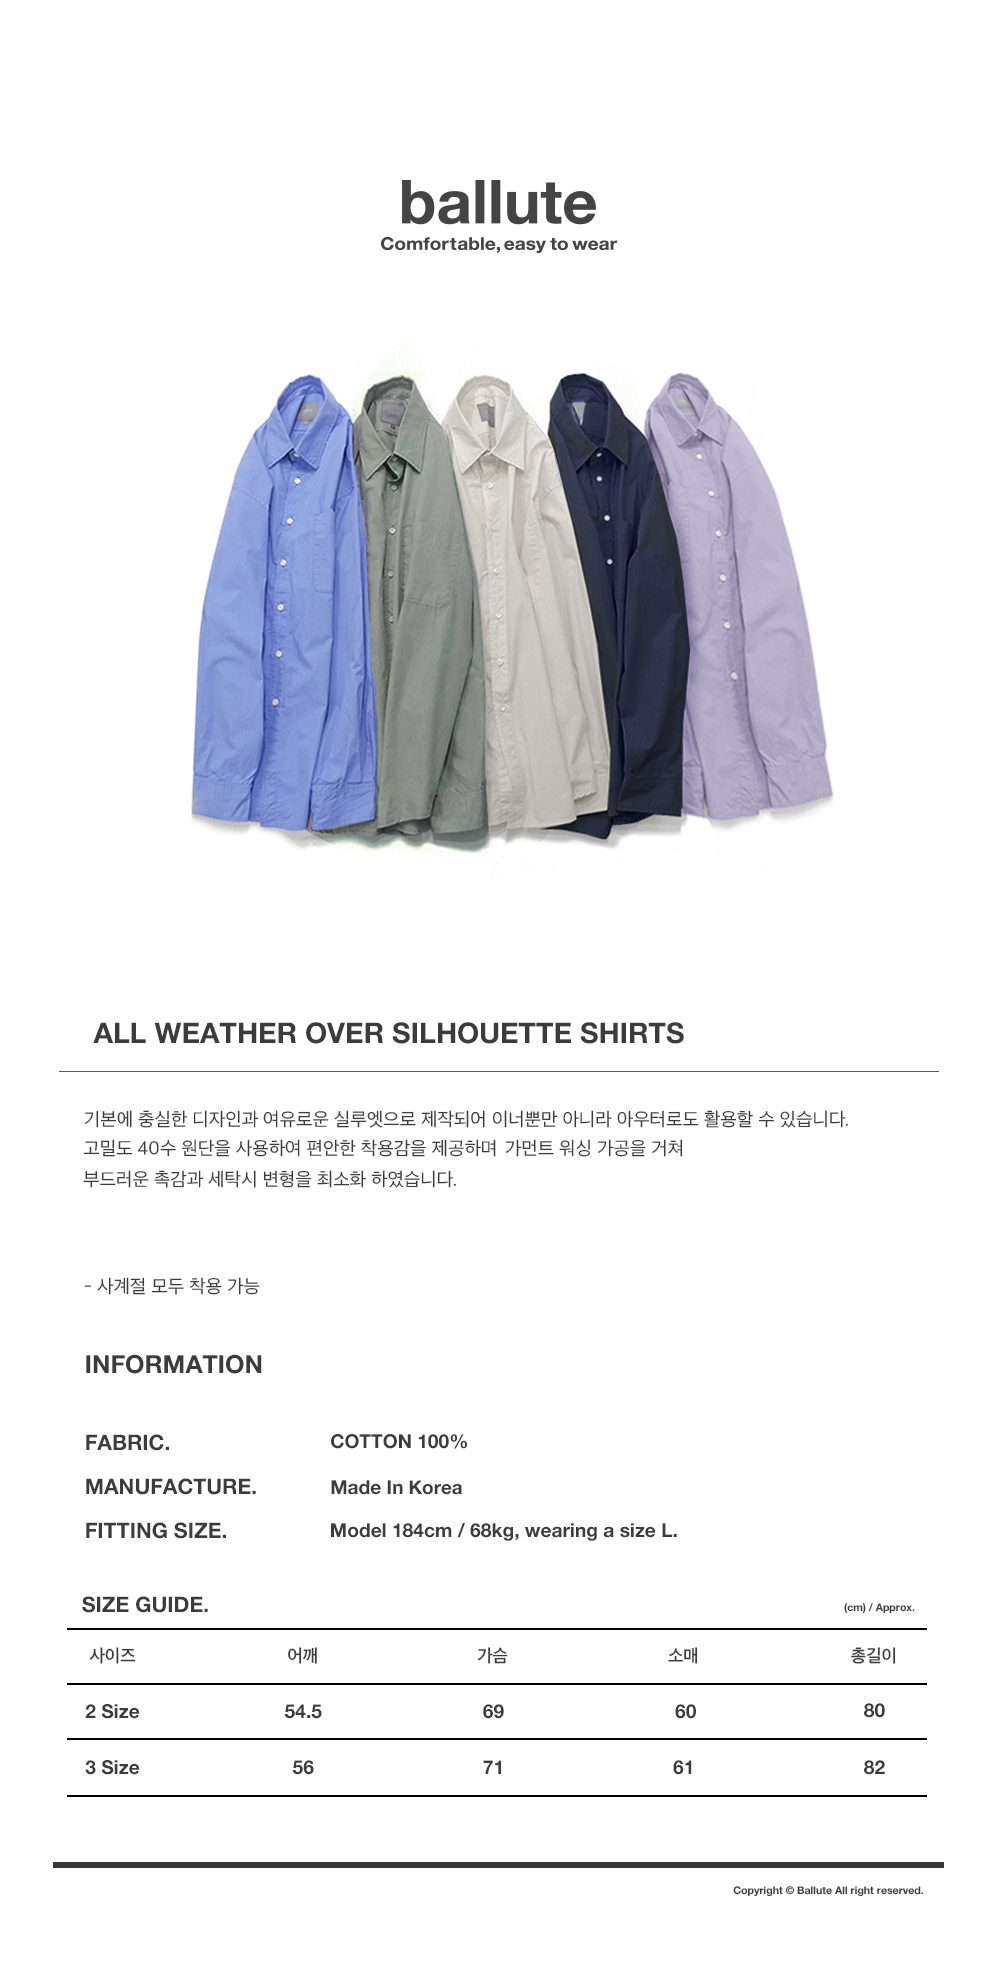 ALL-WEATHER-OVER-SILHOUETTE-SHIRTS-_02.jpg